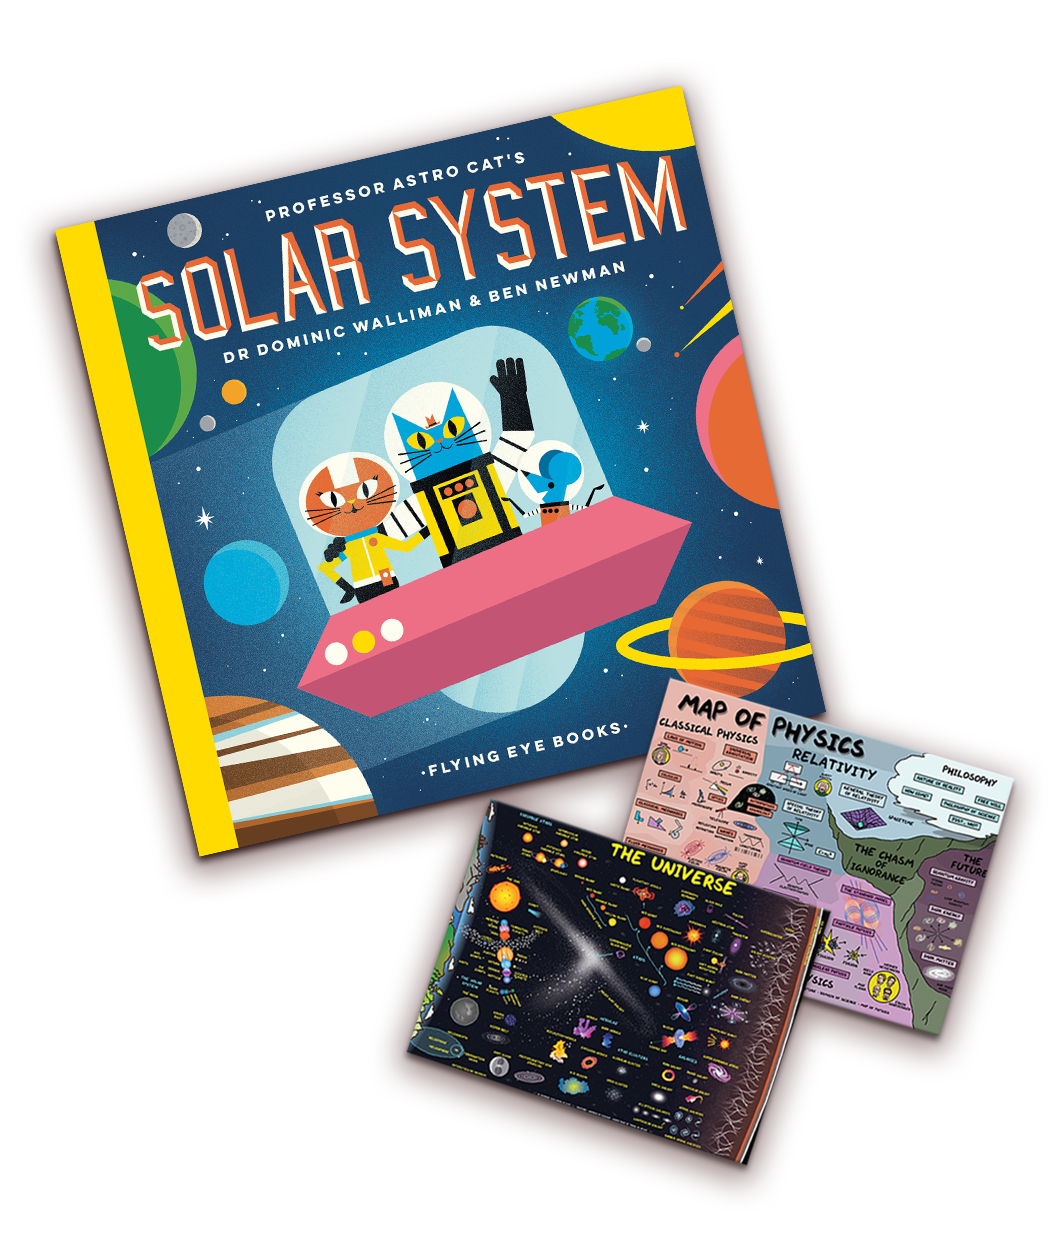 A book with a drawing of 2 cats and a mouse in a space ship on the cover alongside two postcards - by Domain of Science